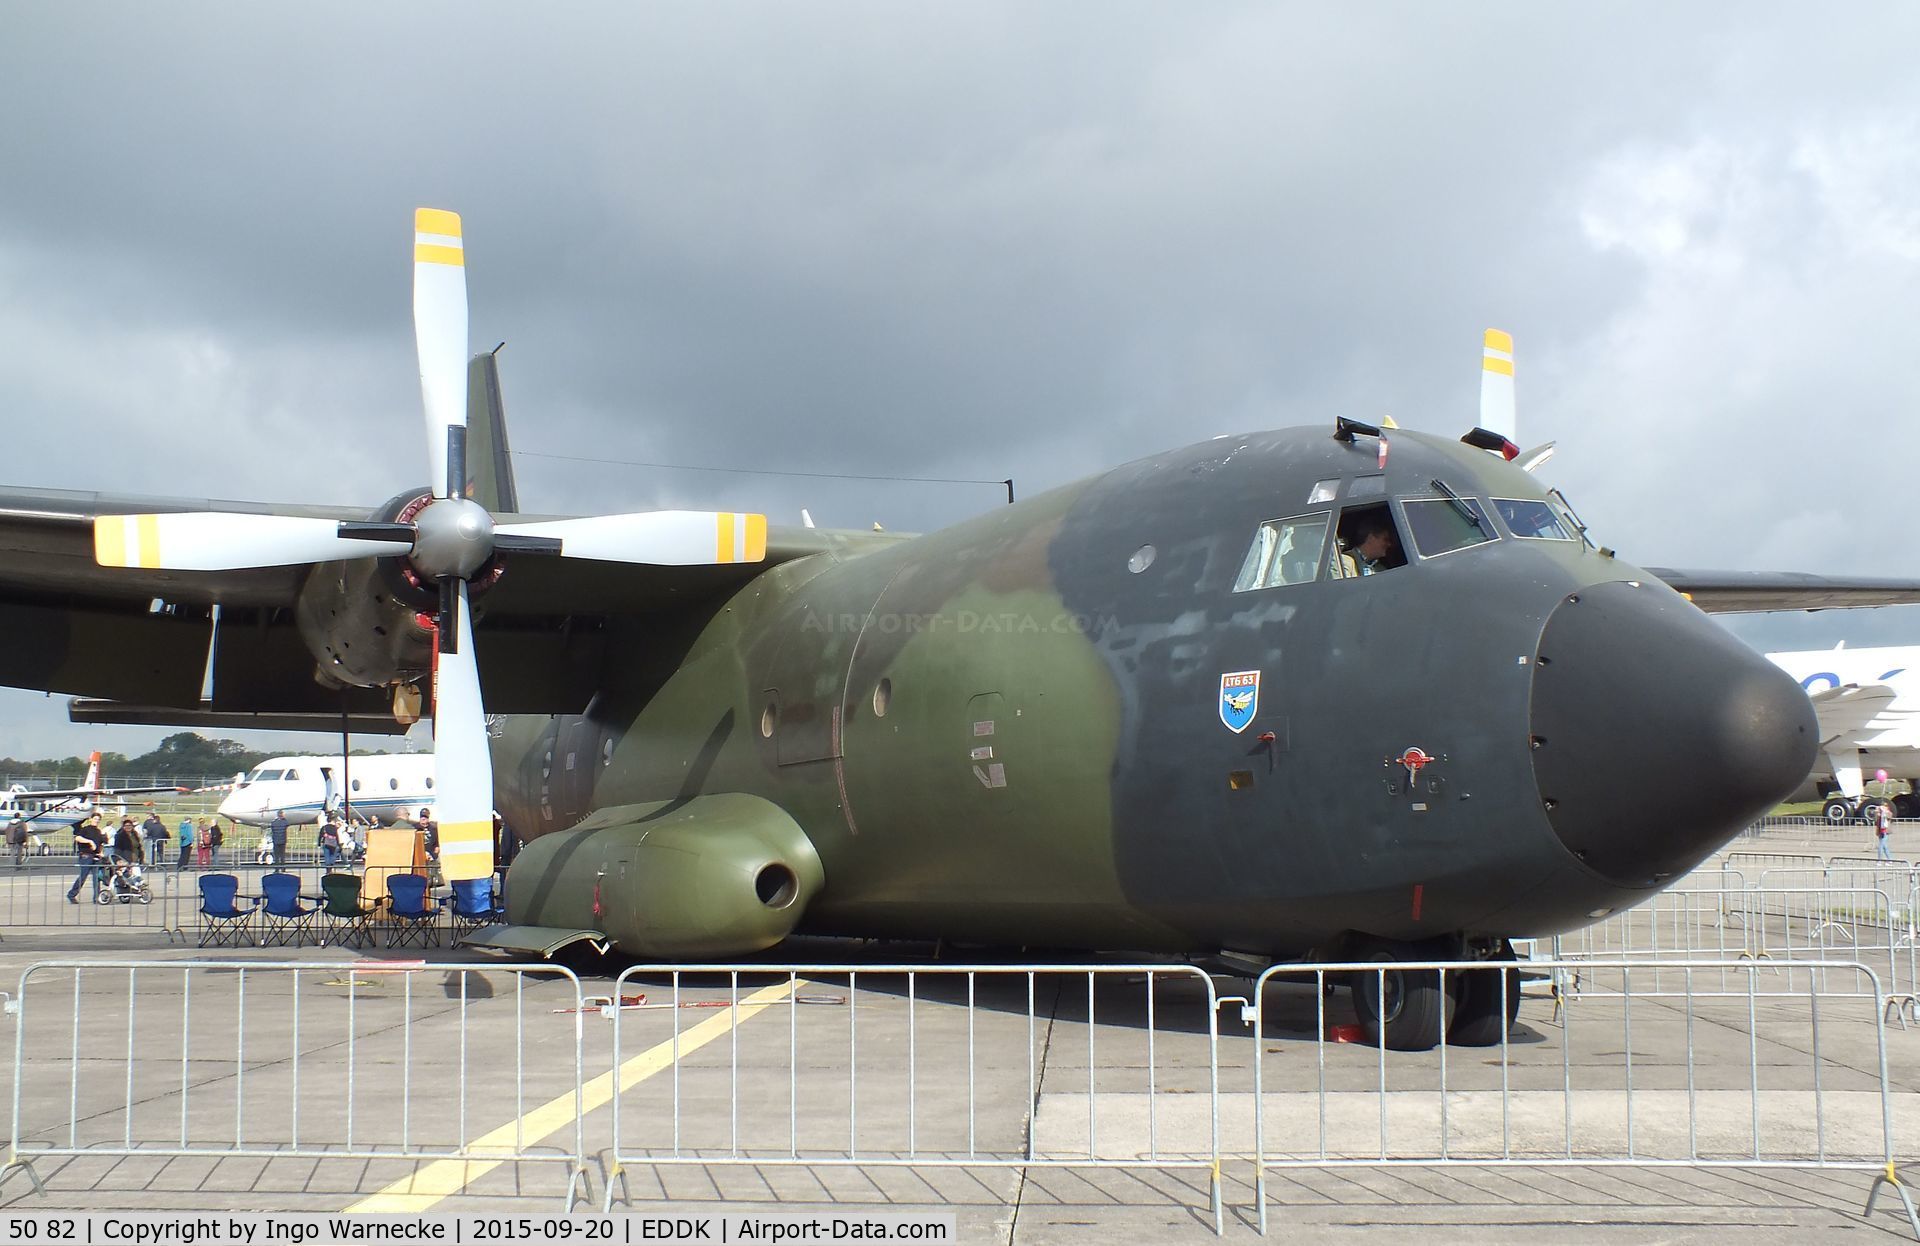 50 82, Transall C-160D C/N D119, Transall C-160D of the Luftwaffe (German Air Force) at the DLR 2015 air and space day on the side of Cologne airport